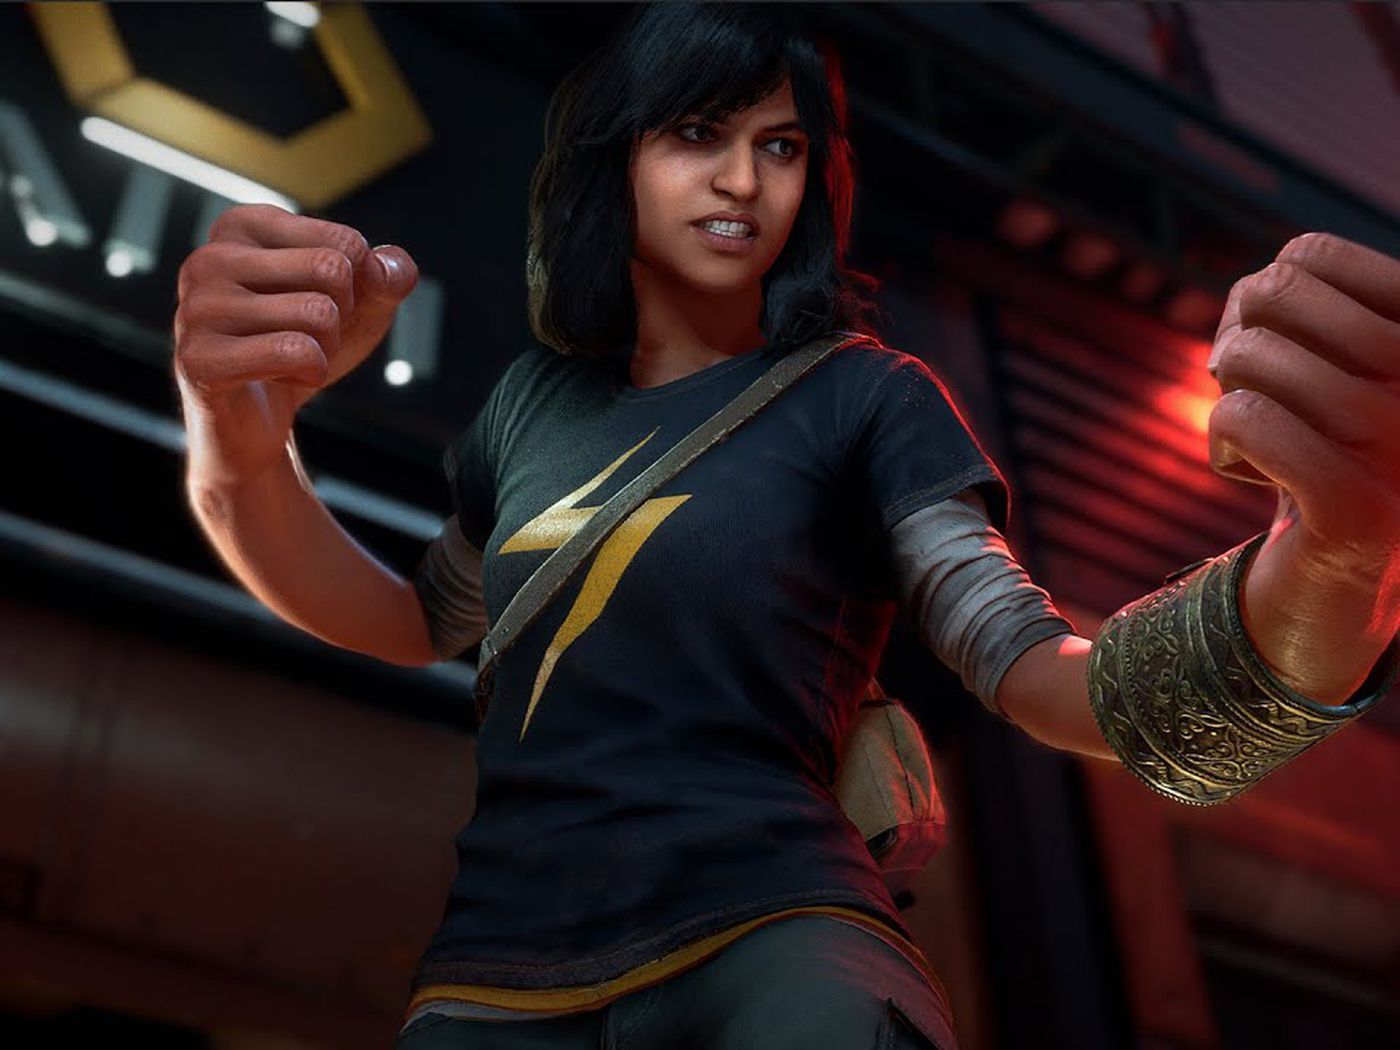 Marvel's Avengers game adds Ms. Marvel to the roster